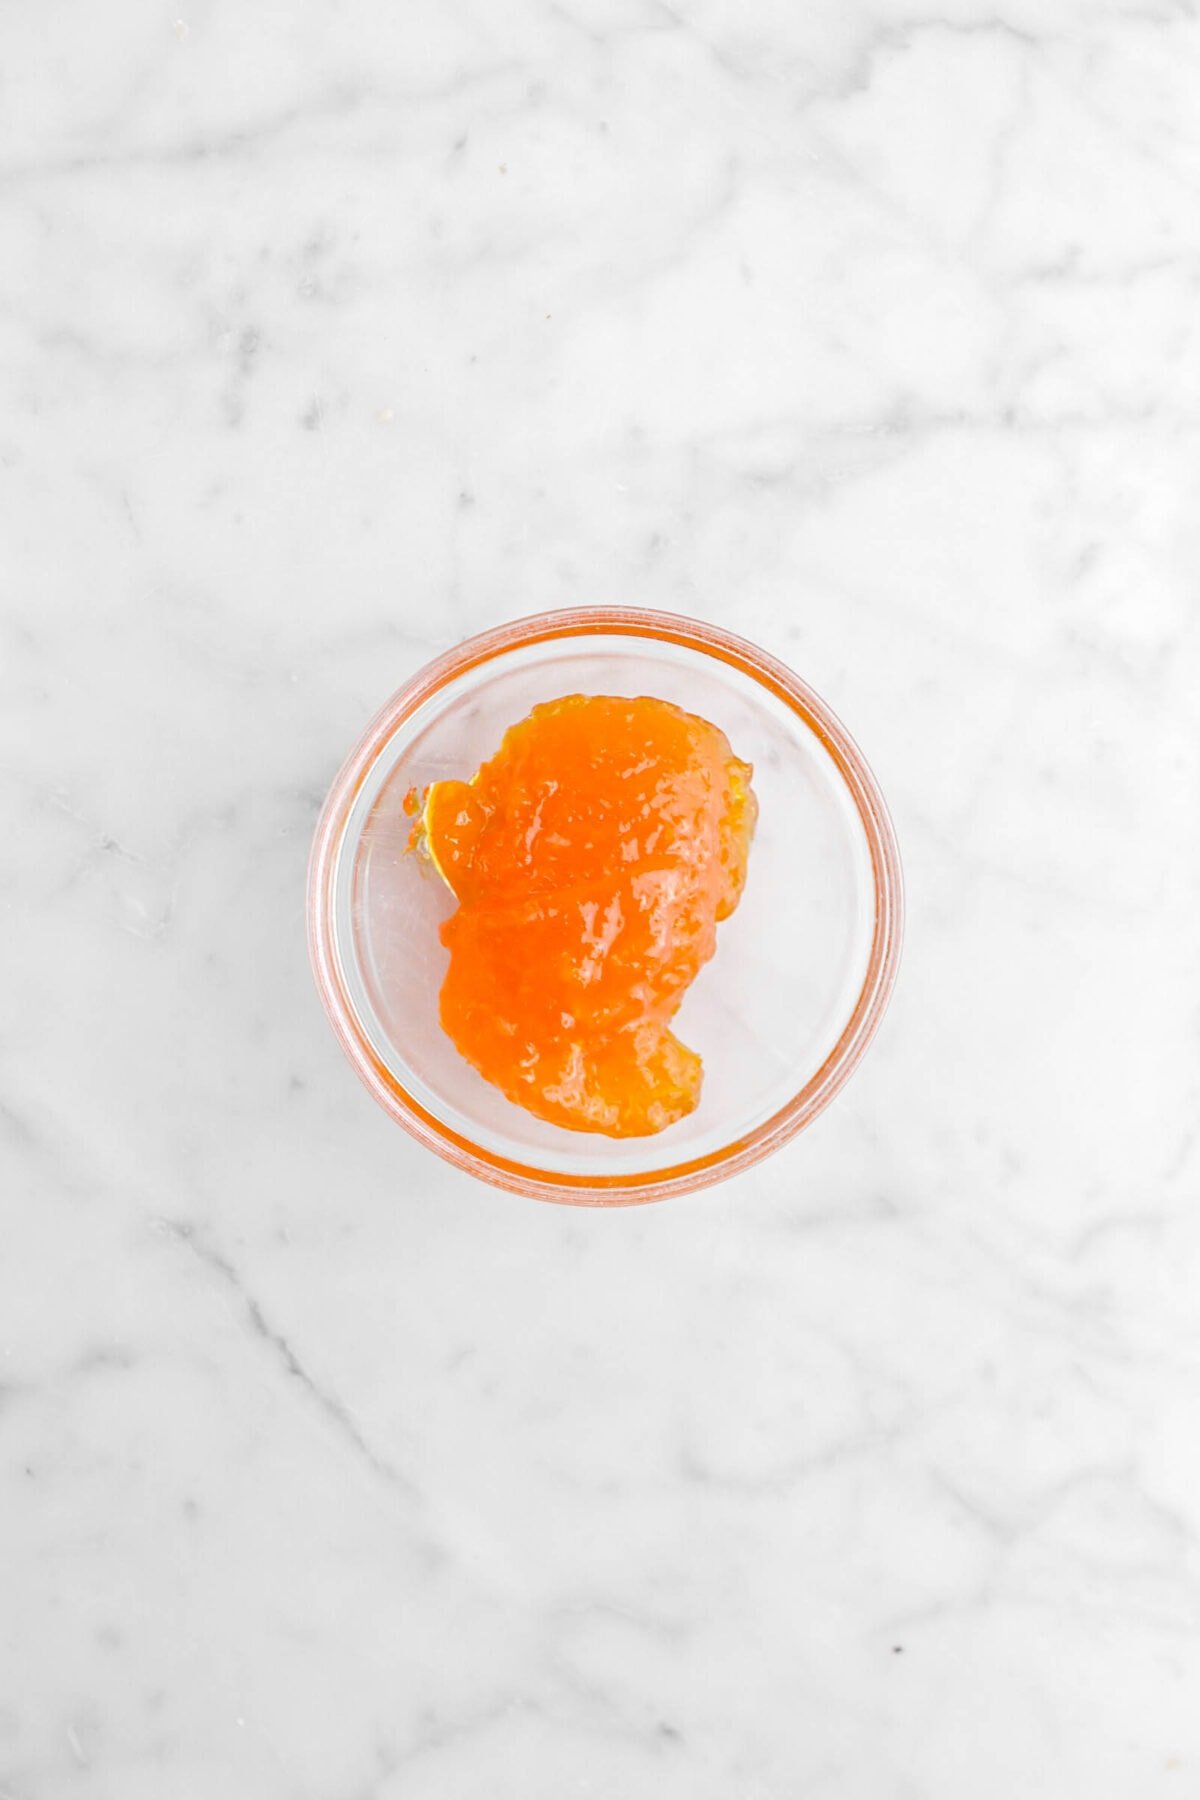 apricot jam in glass bowl